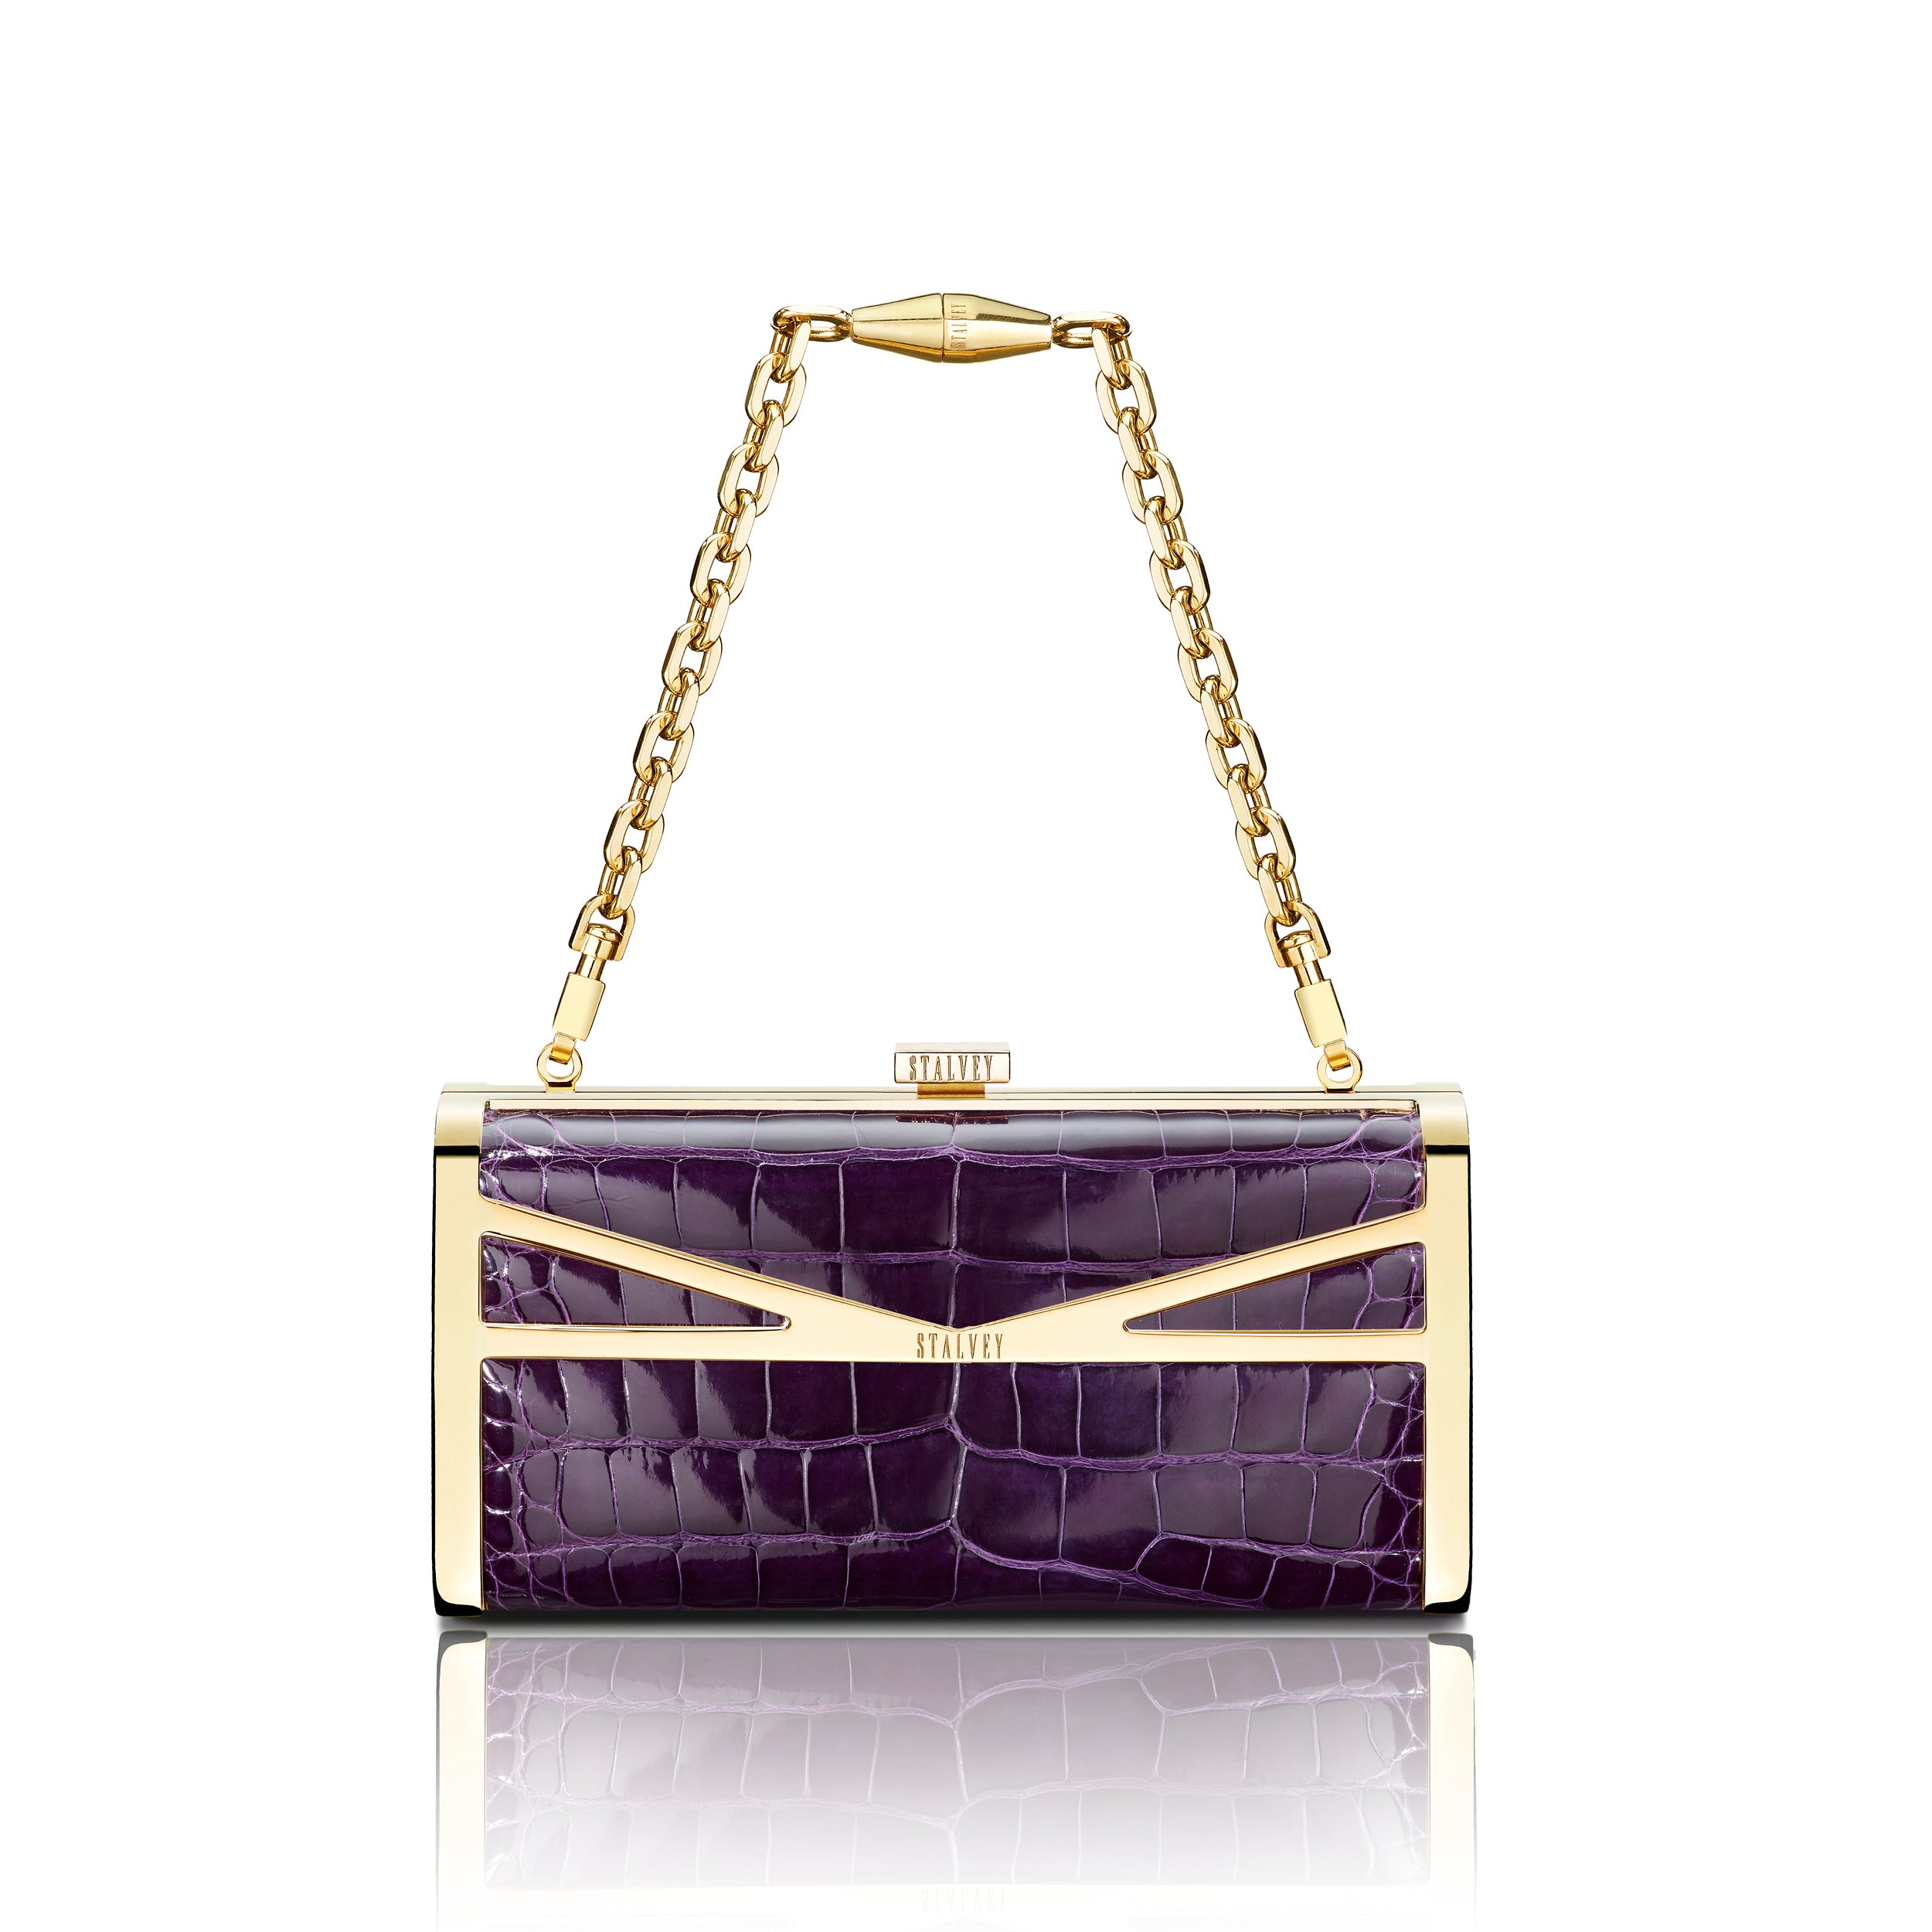 STALVEY Square Clutch in Royal Purple Alligator with 24kt Gold Hardware Front View with Chain